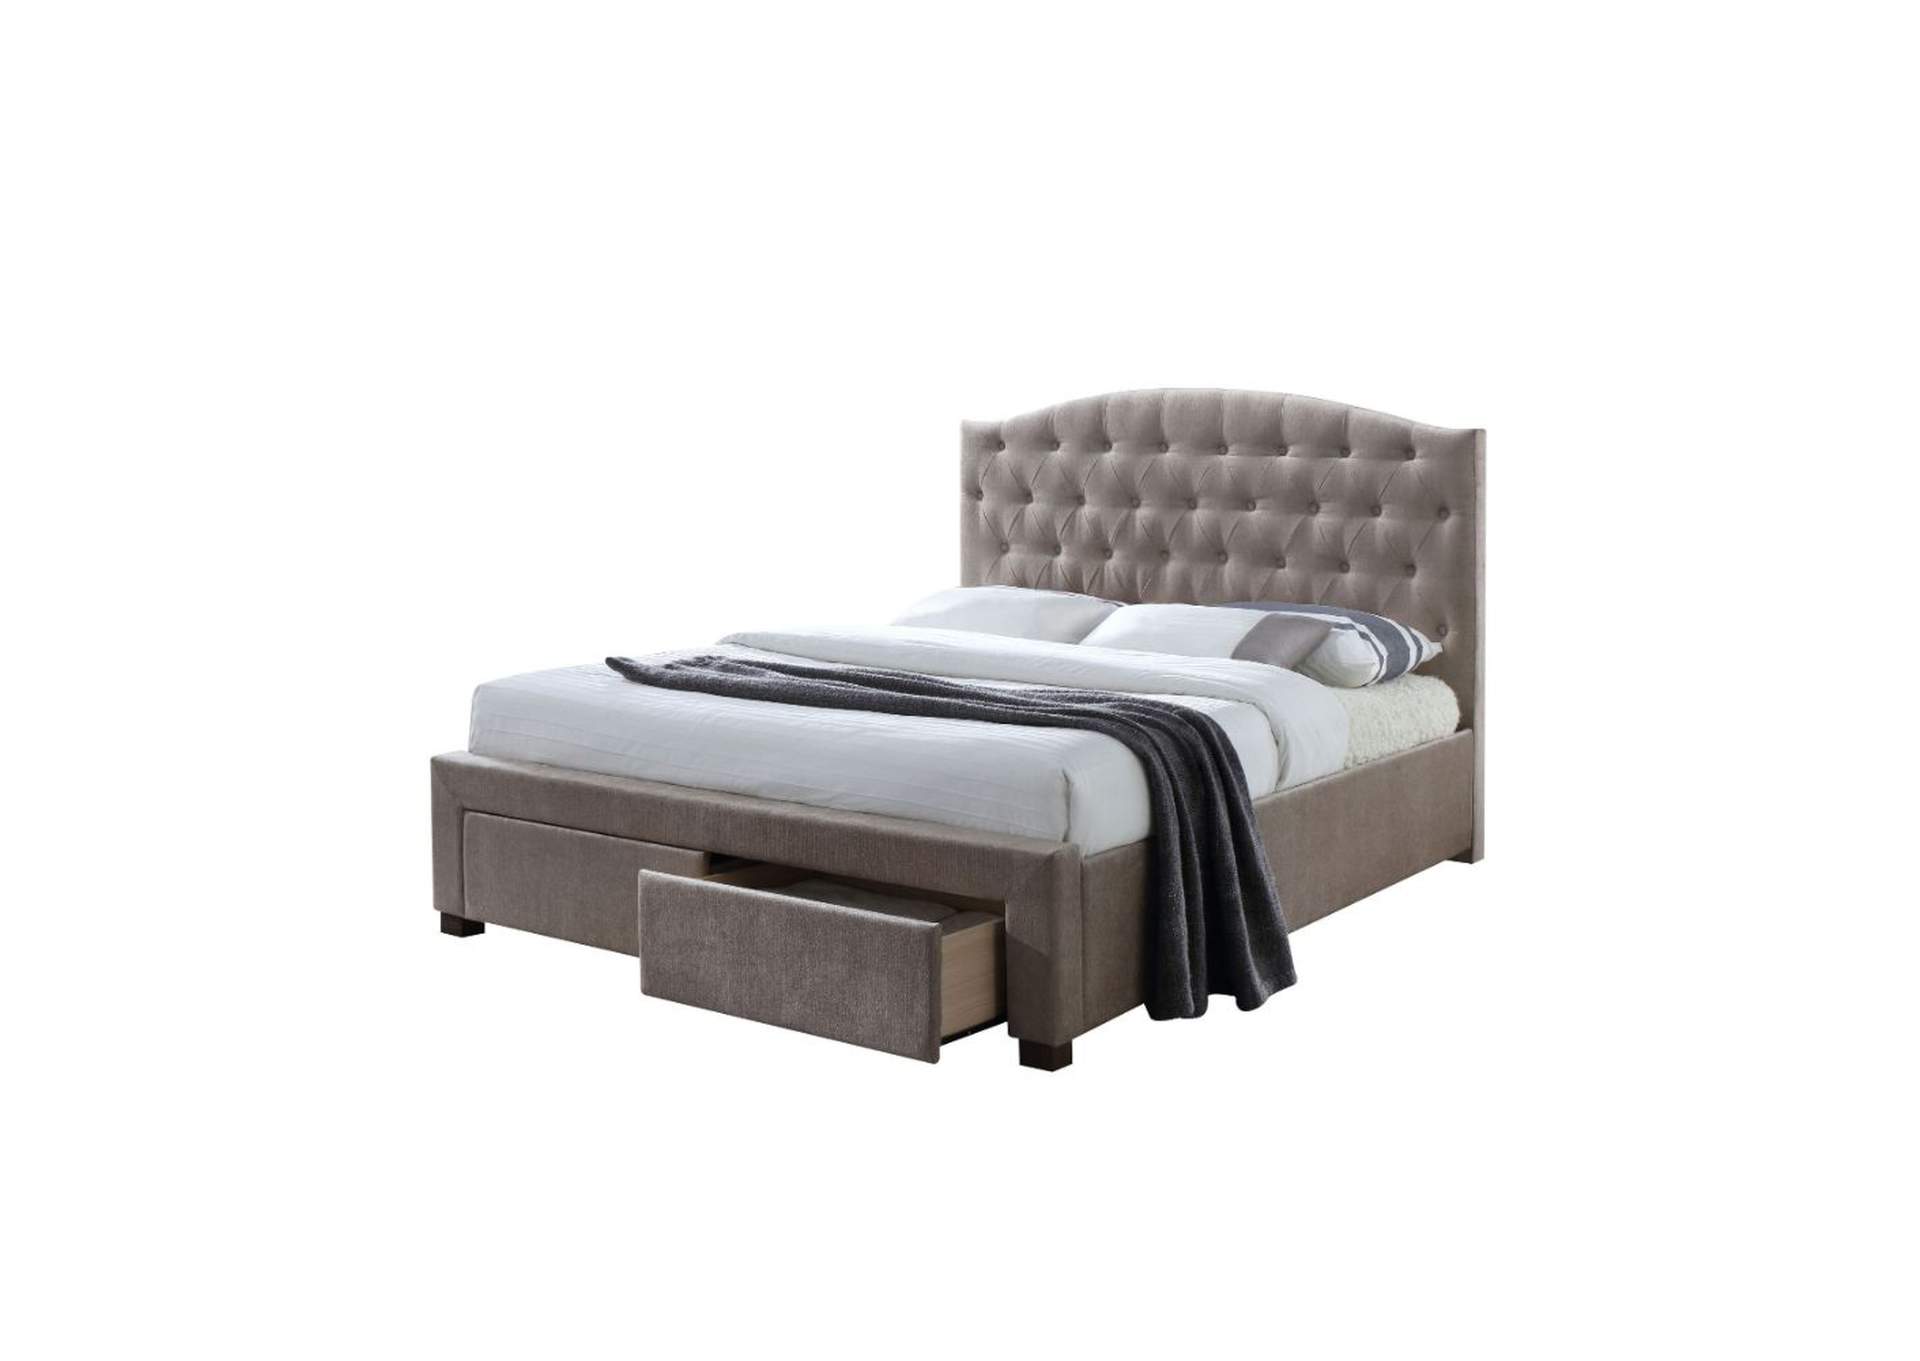 Mink Fabric Denise Queen Bed,Acme